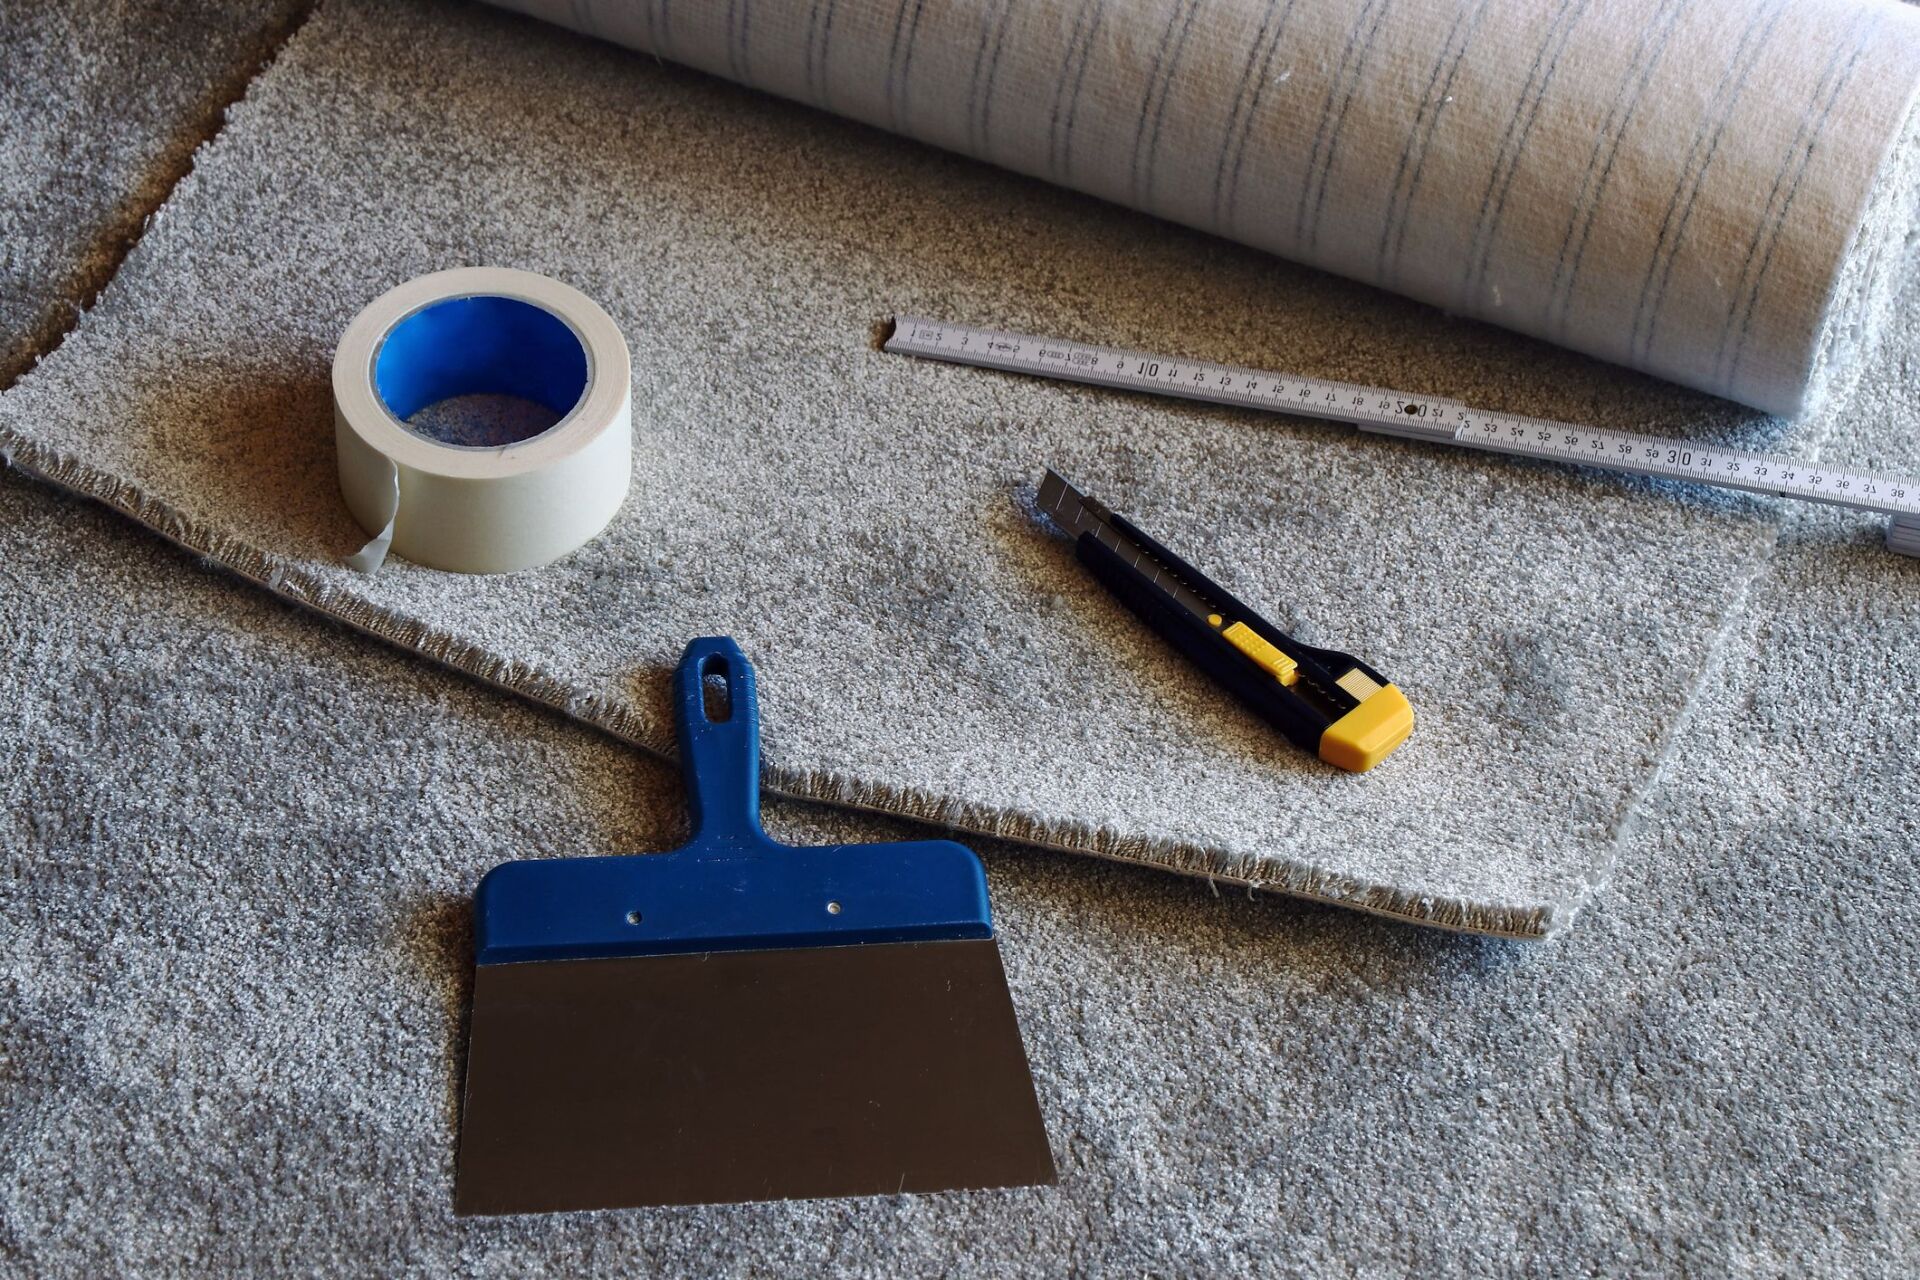 Assorted tools for carpet repair, including a utility knife, carpet adhesive, and a measuring tape.